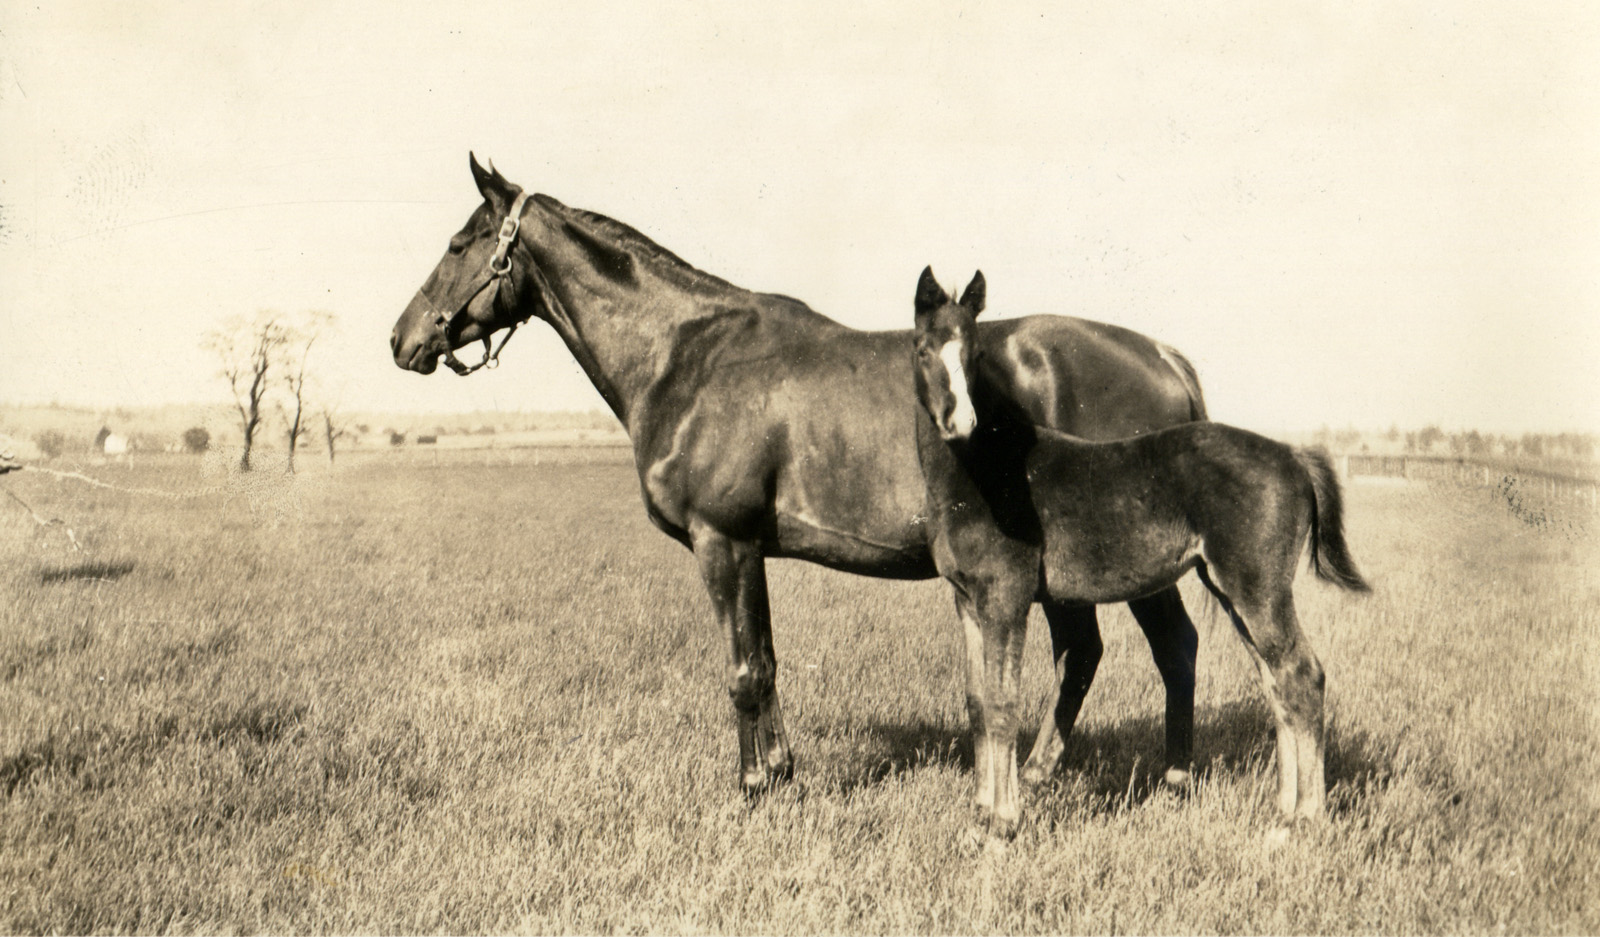 Marguerite with Gallant Fox as a foal, 1927 (L. S. Sutcliffe/Museum Collection)